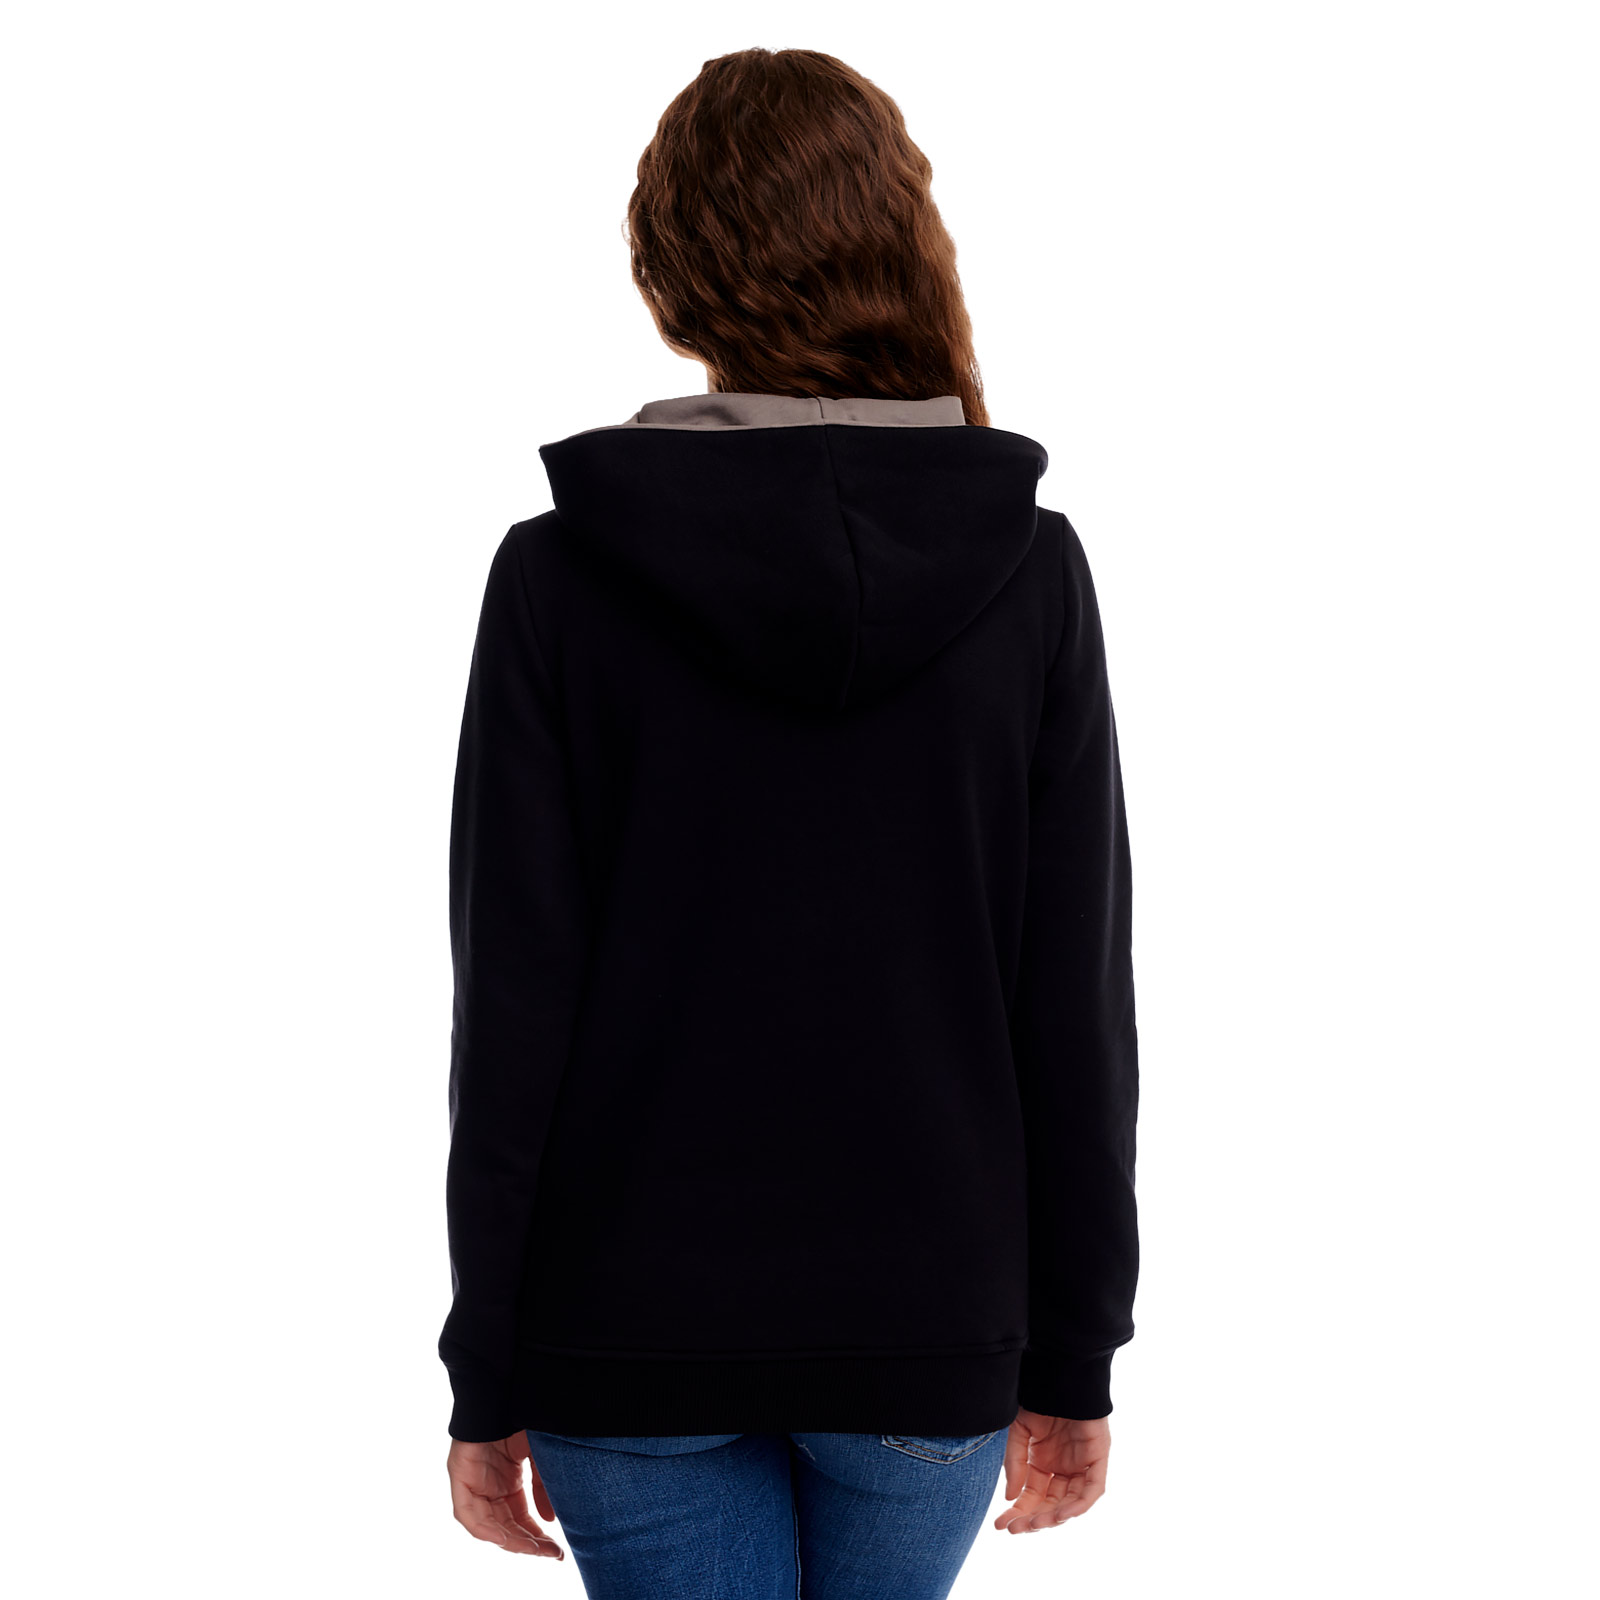 Arielle - Part of Your World Hoodie Women's Black